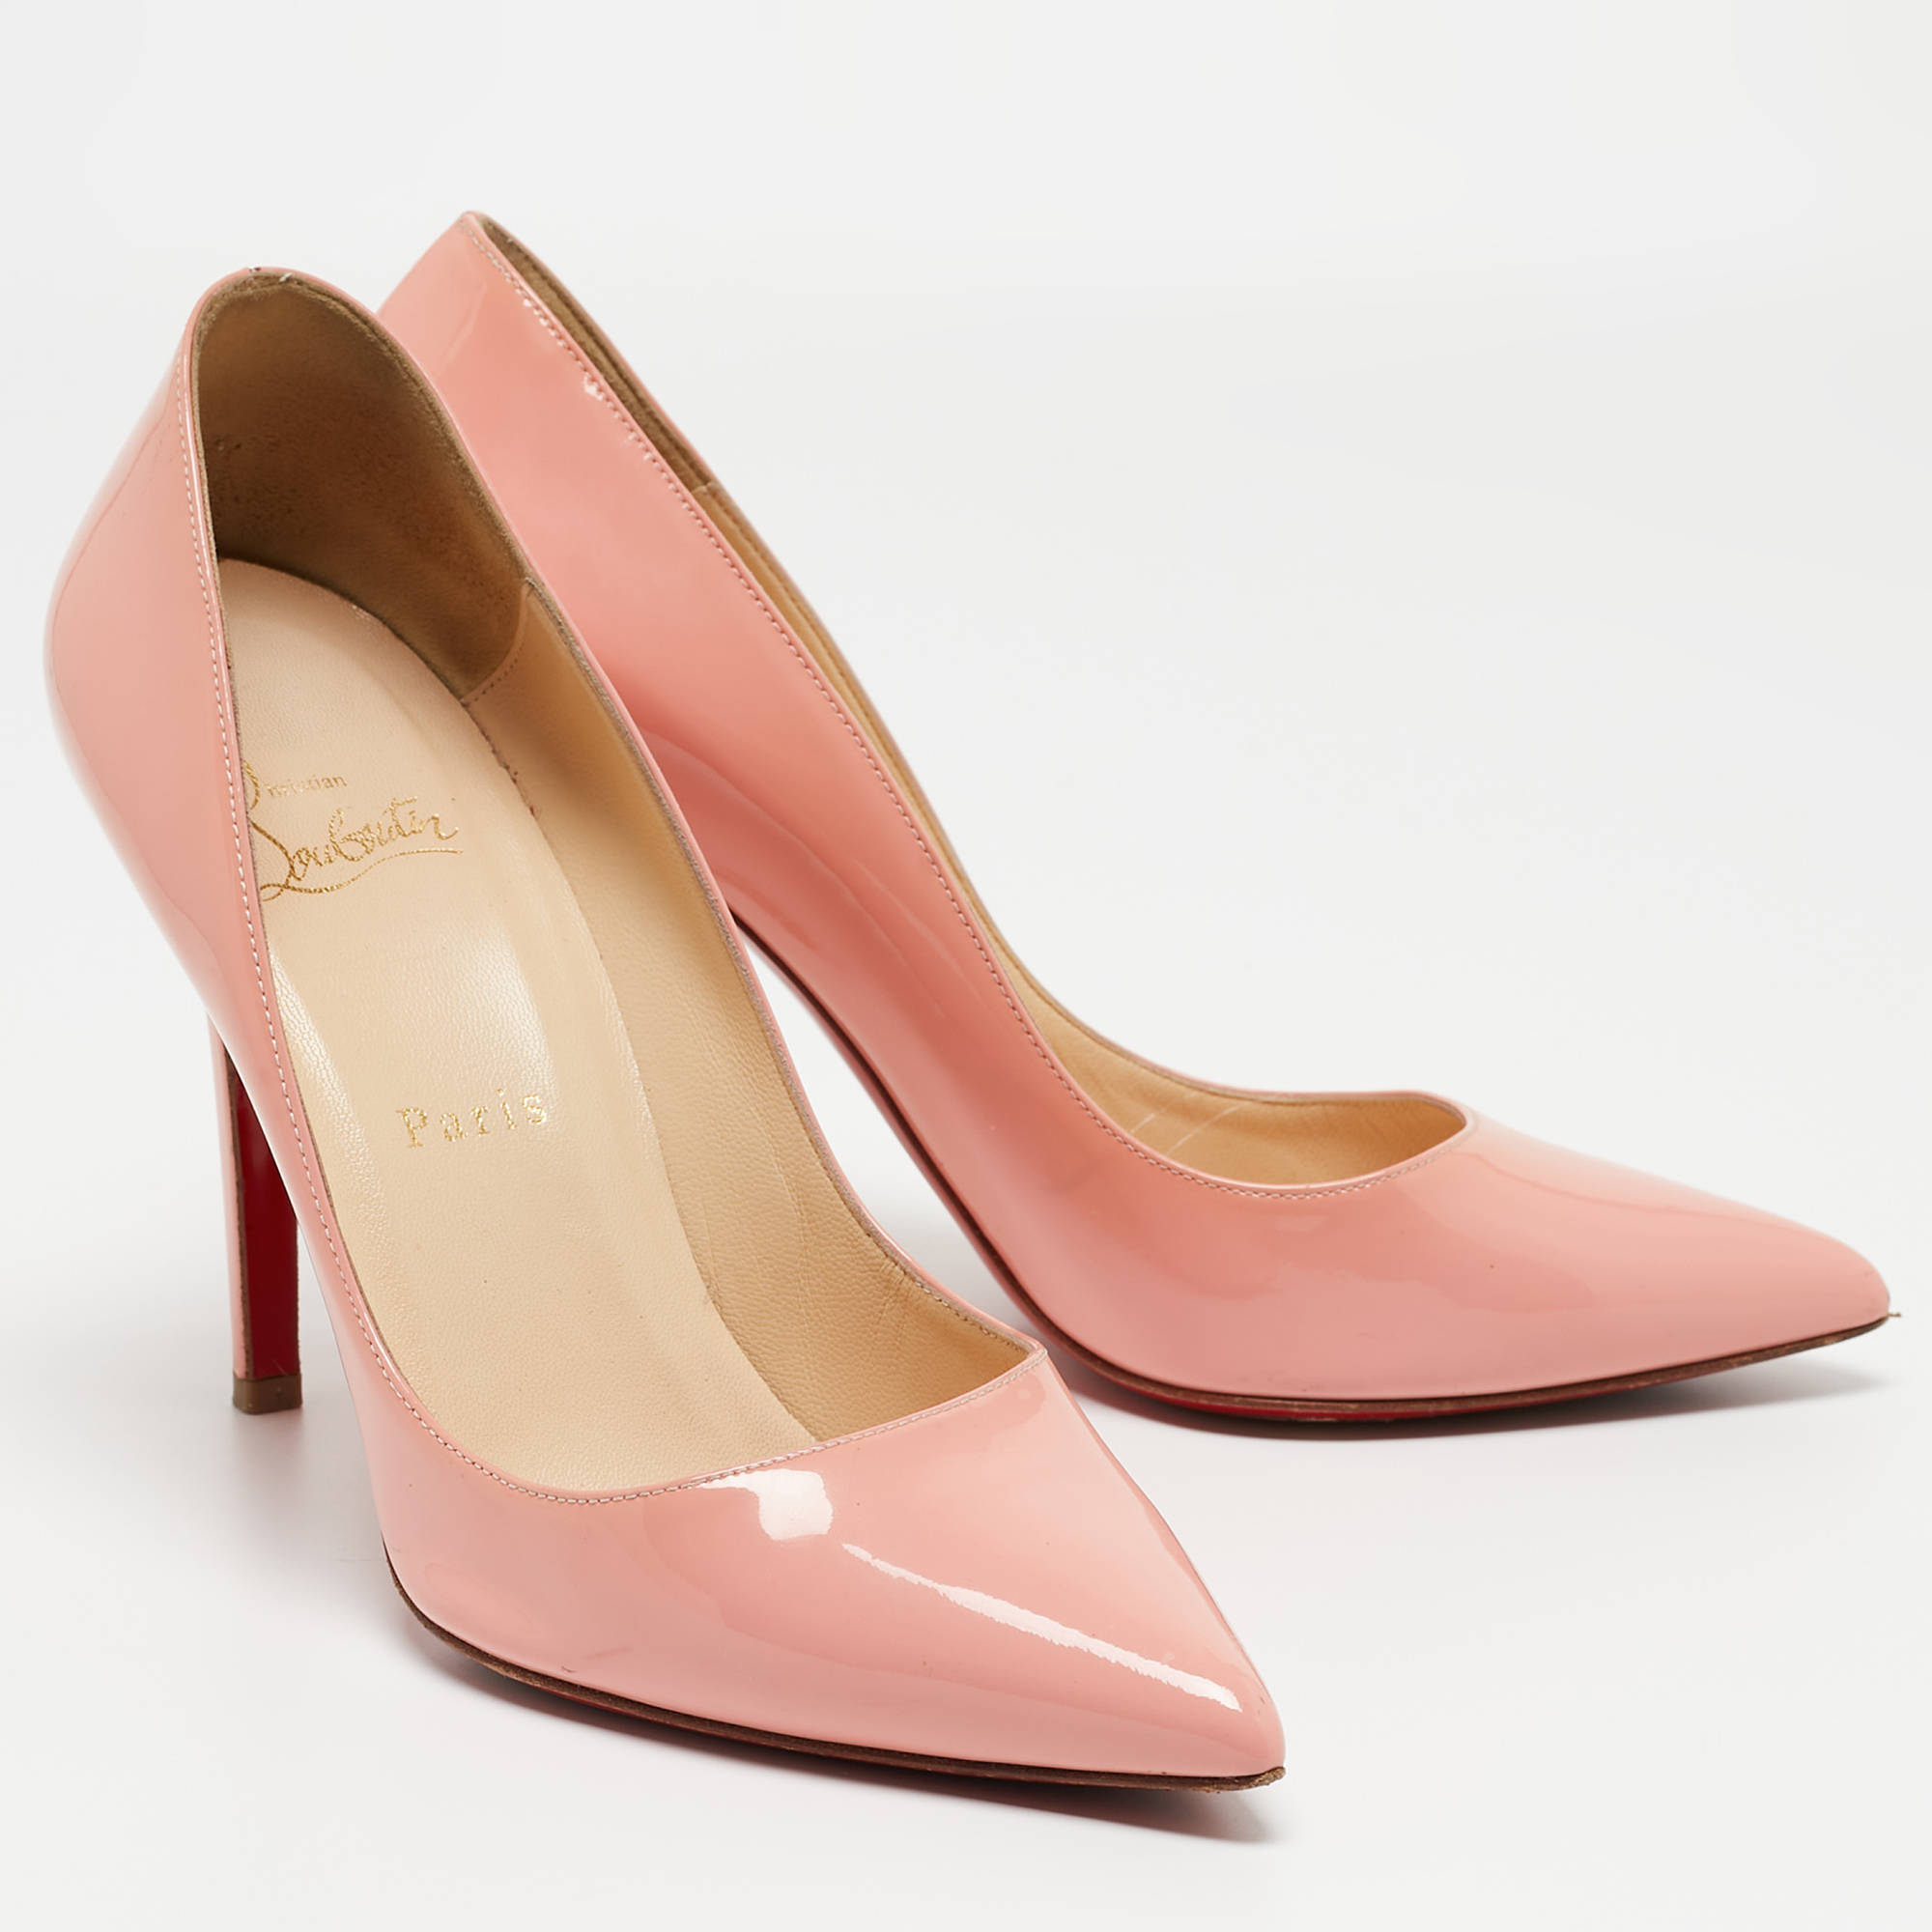 Christian Louboutin Pink Patent Leather Pigalle Pumps Size 38.5